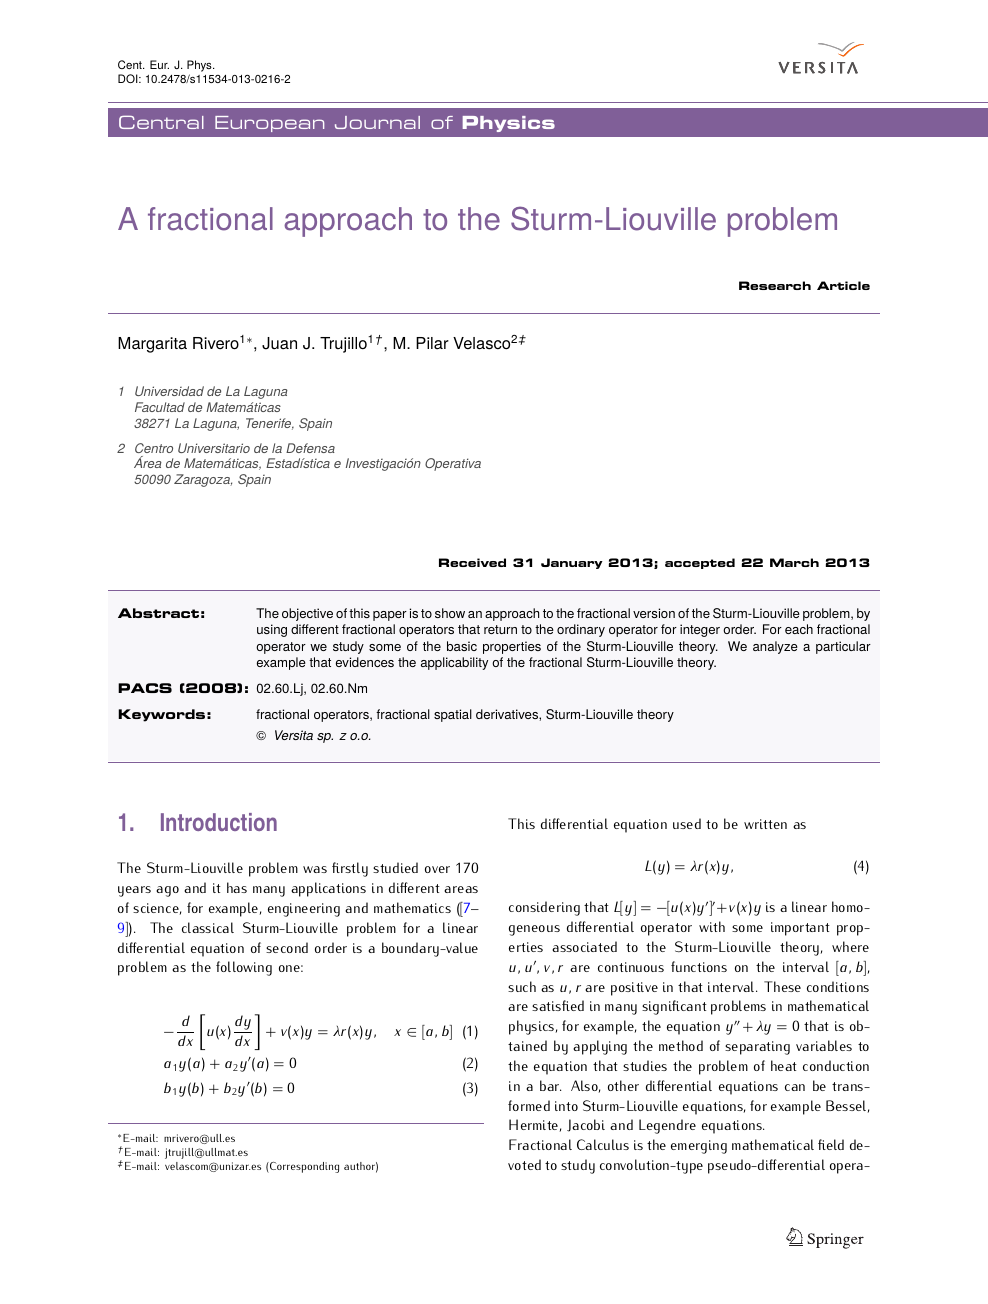 A Fractional Approach To The Sturm Liouville Problem Topic Of Research Paper In Mathematics Download Scholarly Article Pdf And Read For Free On Cyberleninka Open Science Hub